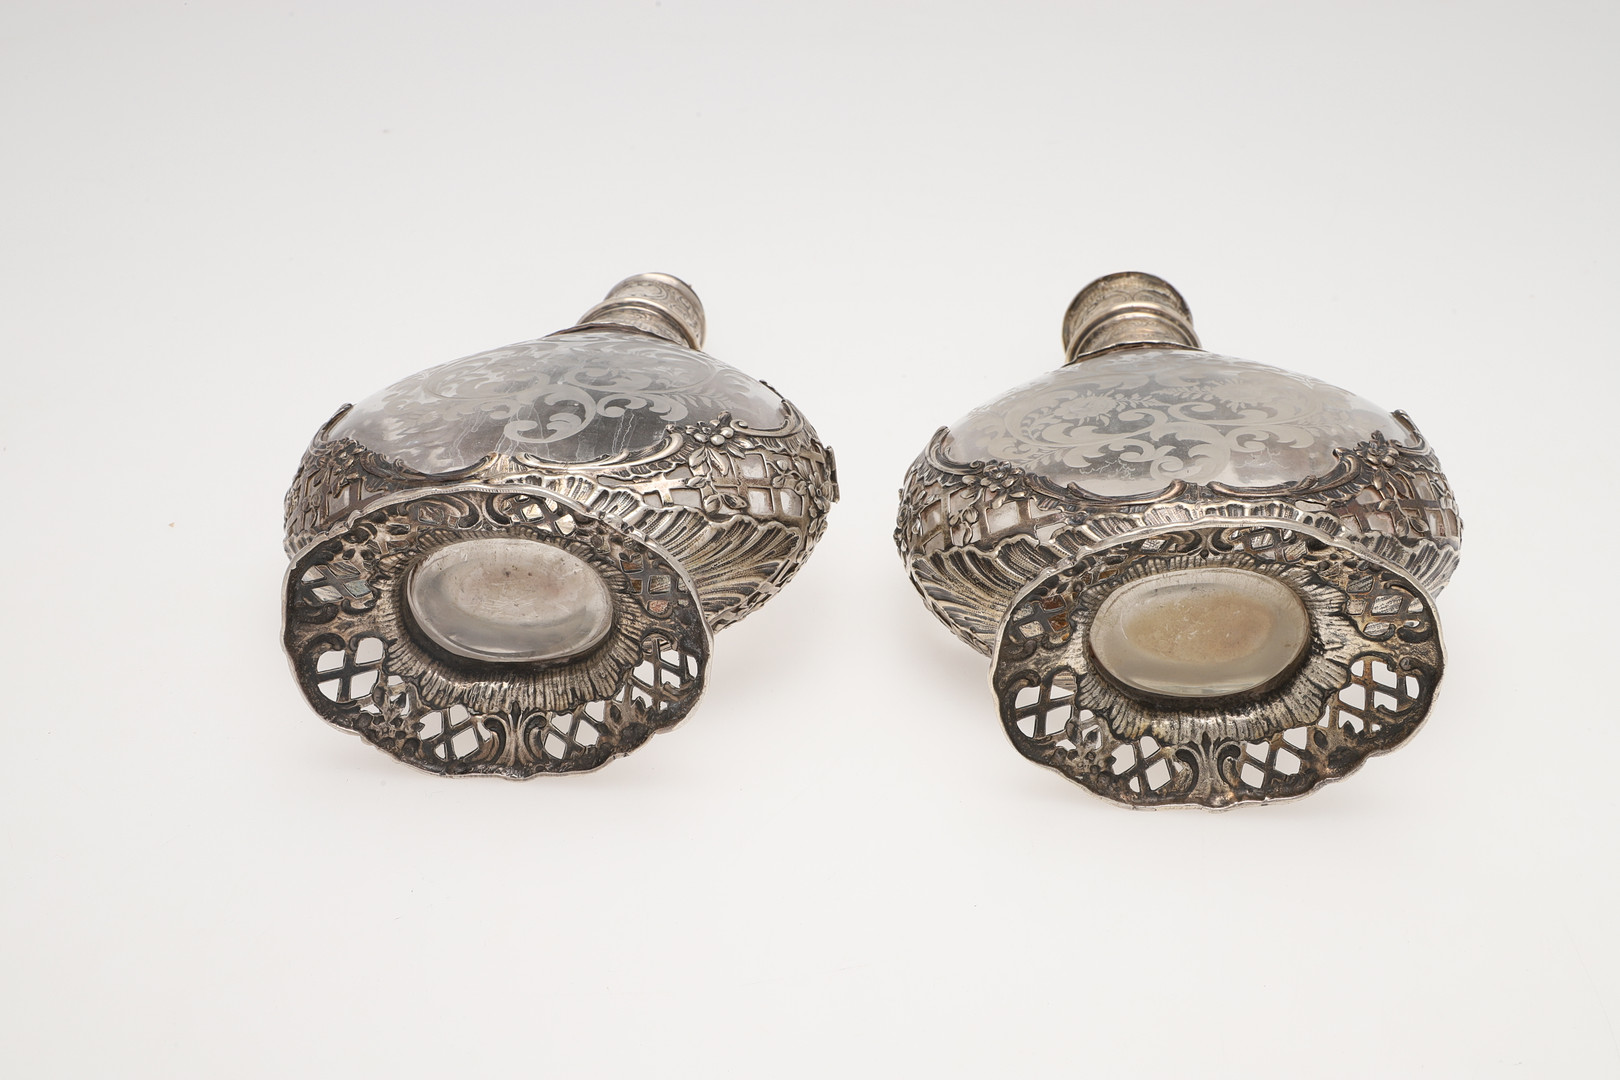 A PAIR OF LATE 19TH/ EARLY 20TH CENTURY GERMAN SILVER MOUNTED DECANTERS. - Image 13 of 13